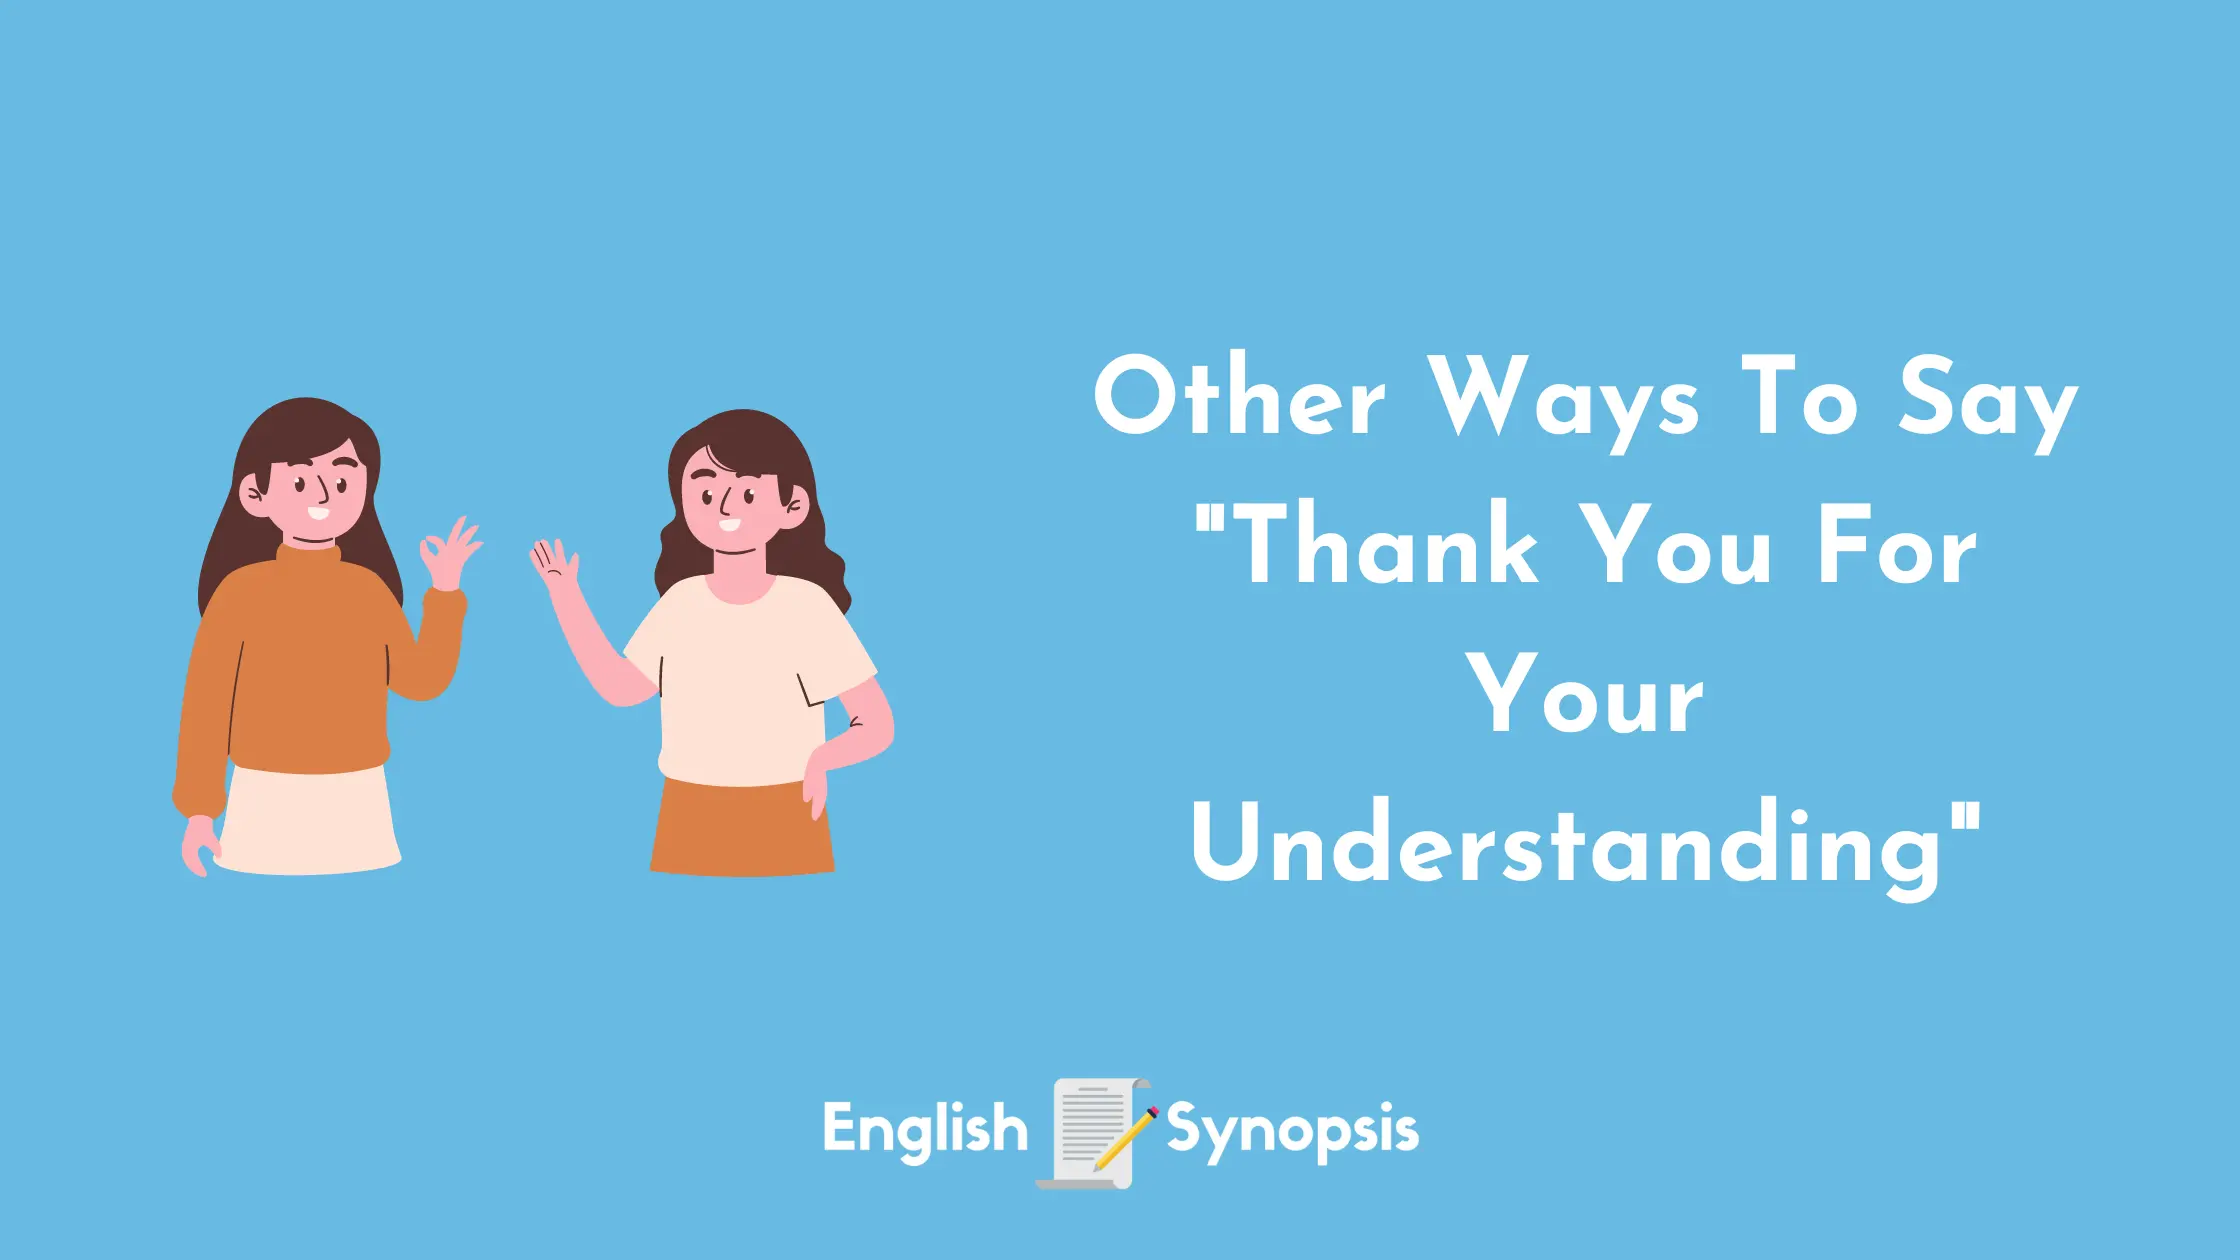 Other Ways To Say "Thank You For Your Understanding"